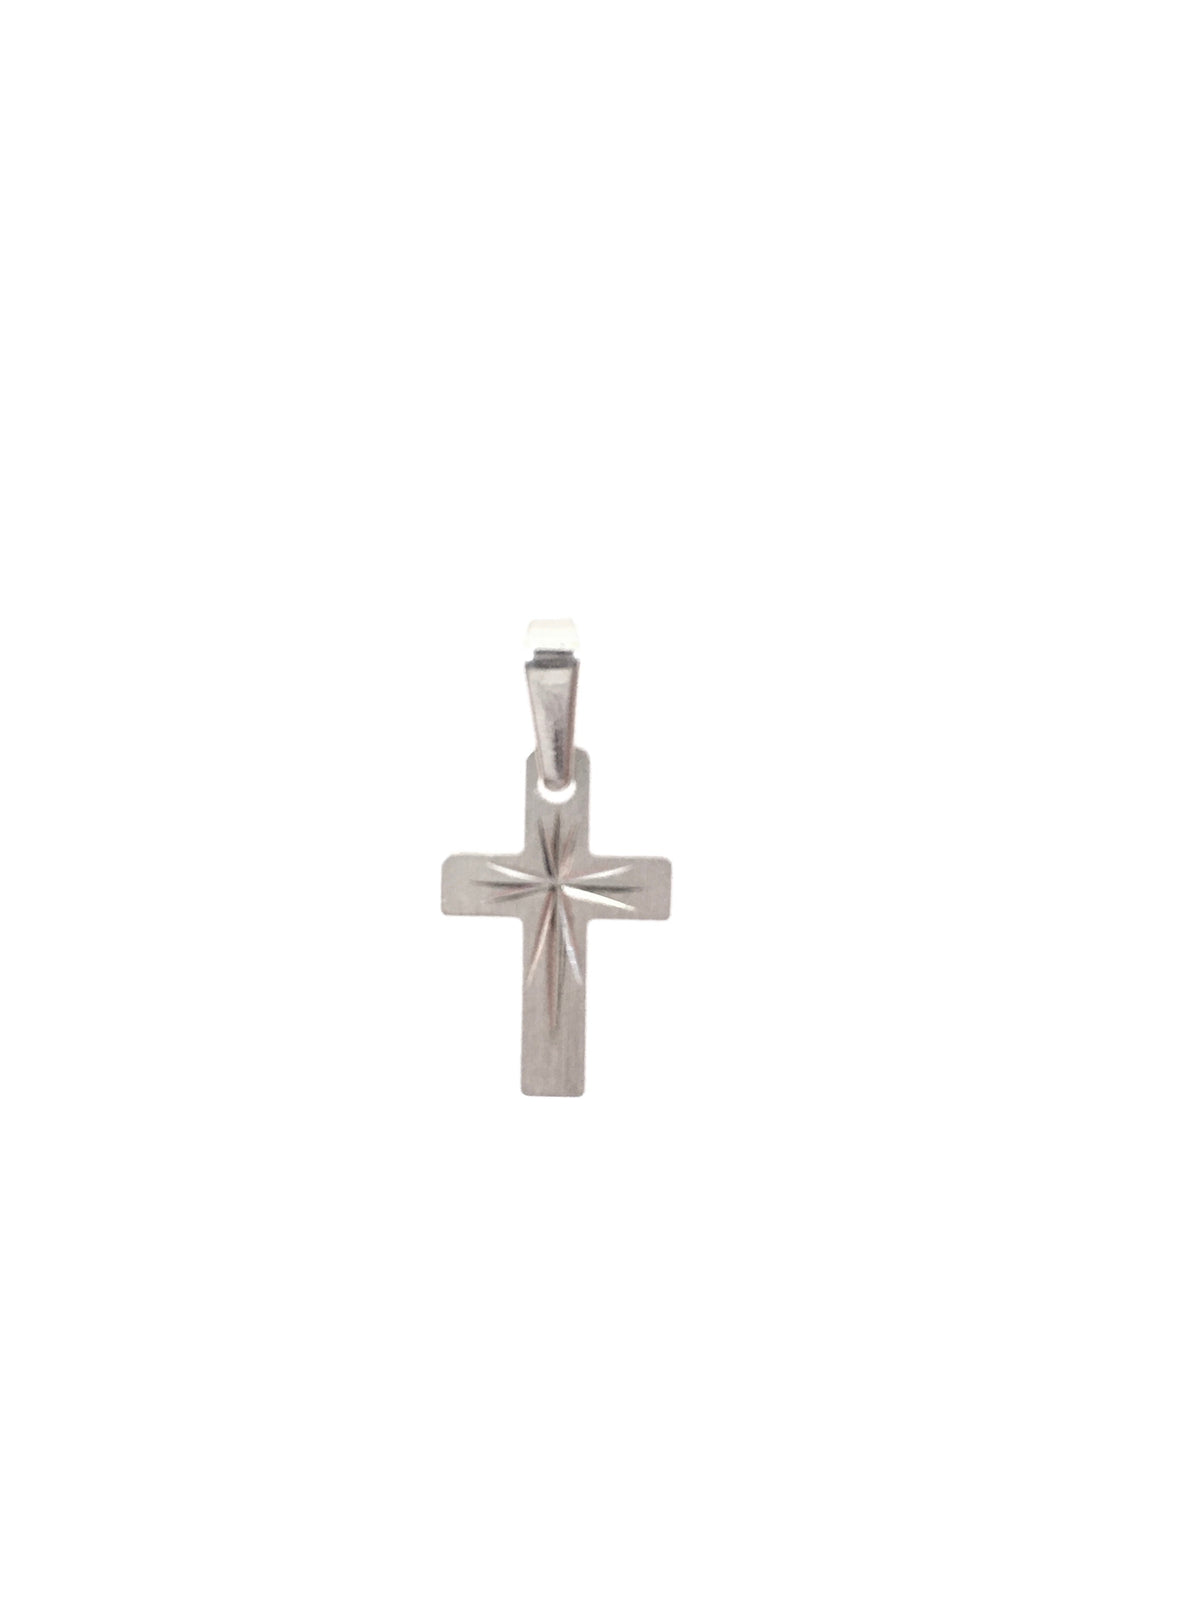 10K White Gold with Etched Center Cross Charm - 23mm x 12mm